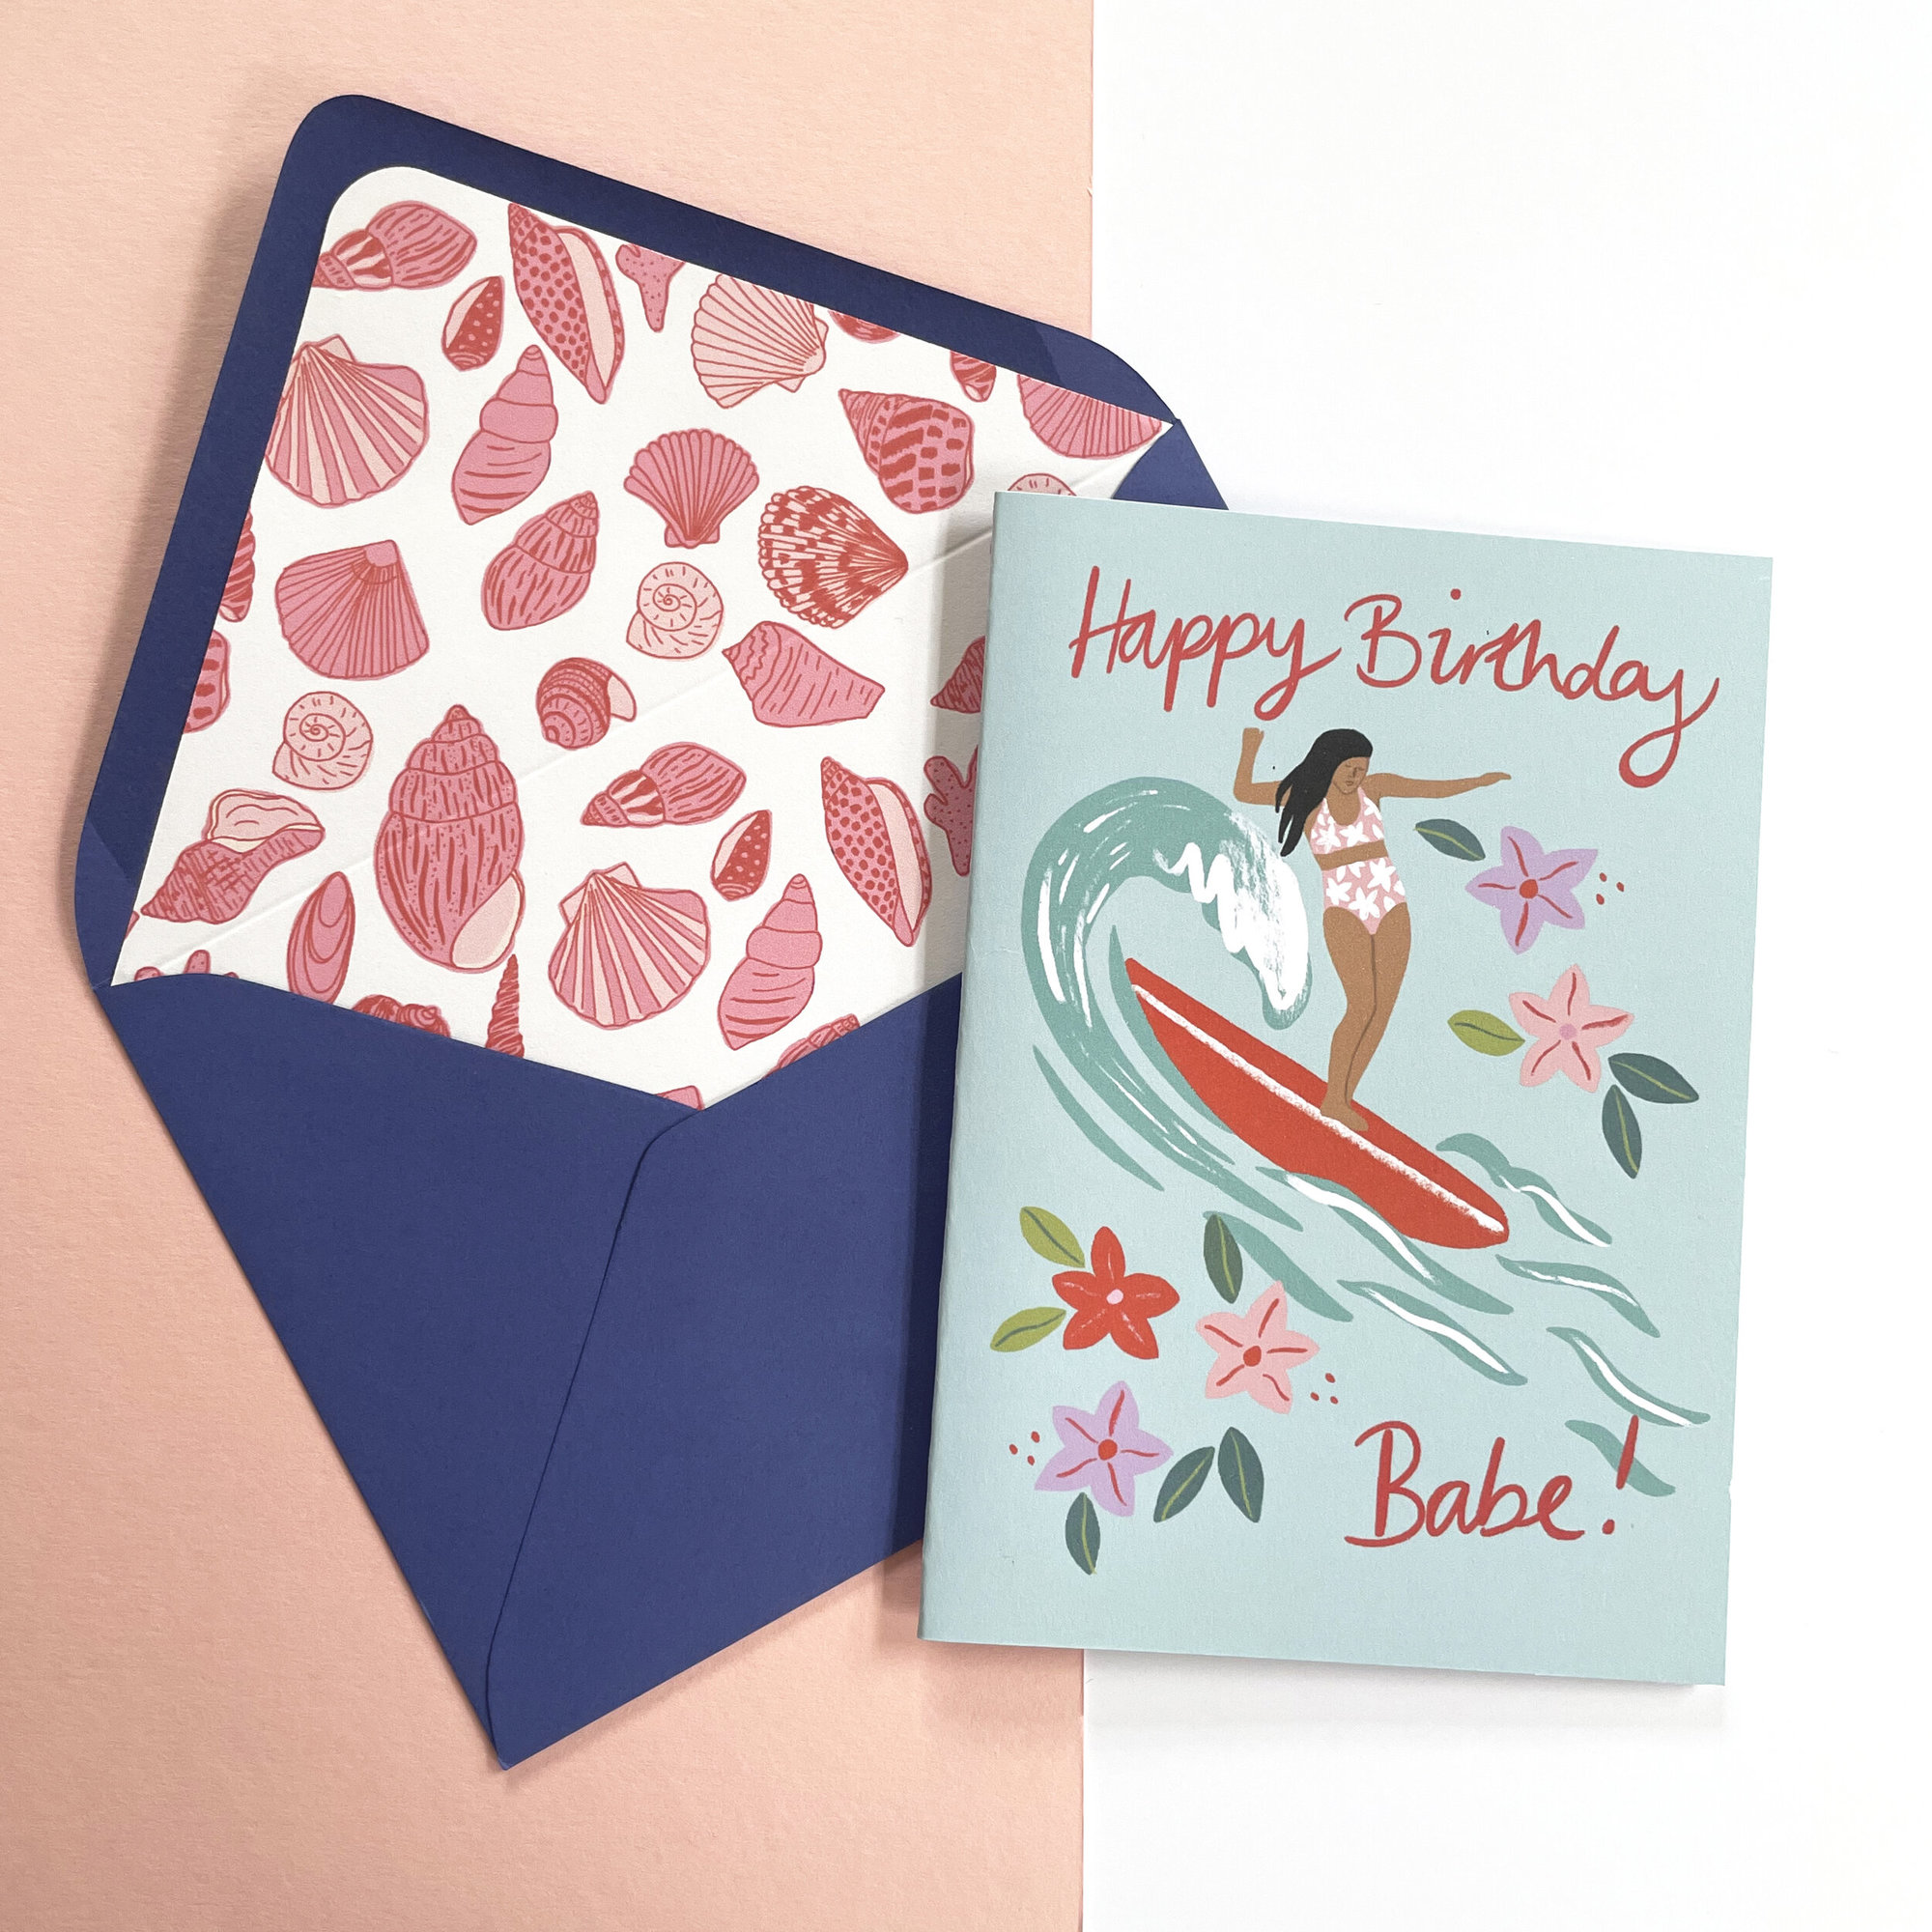 'happy Birthday Babe!'
Surfer Girl Card - Just the card, Lined Envelope